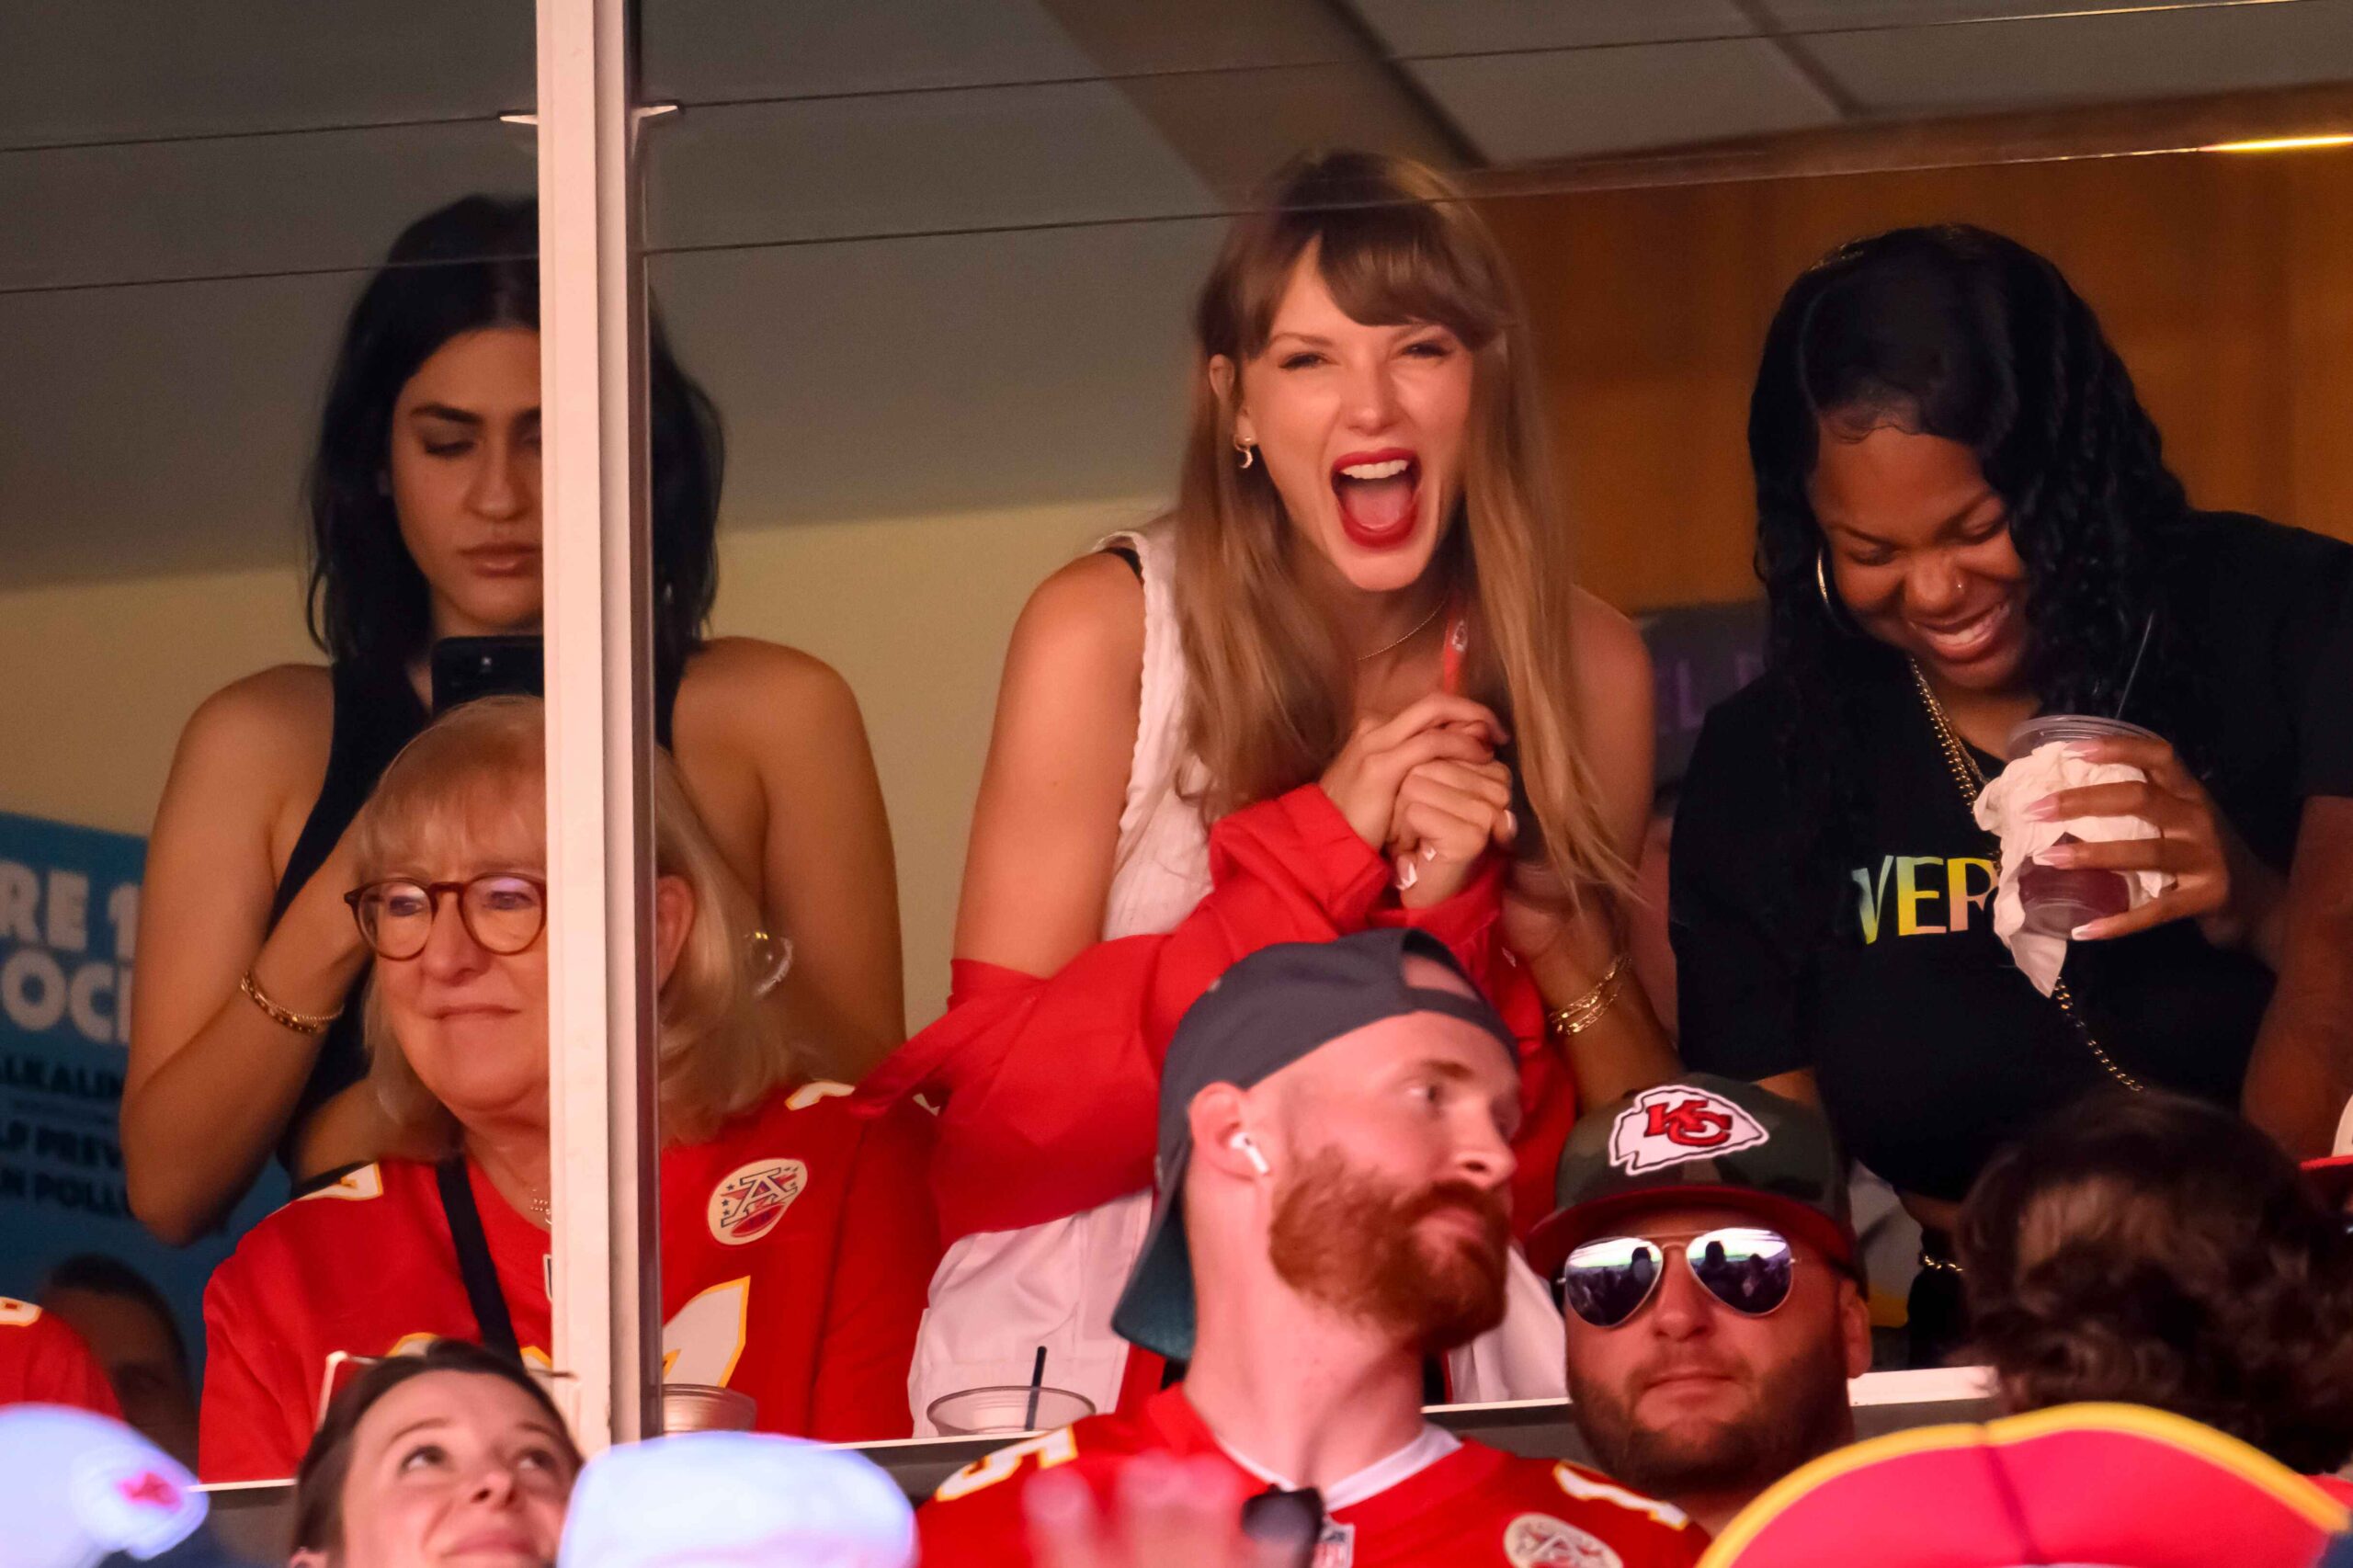 Kansas City Chiefs tight end Travis Kelce's personal brand skyrockets amid dating rumors with pop star Taylor Swift, showing the impact of a "high value" woman.